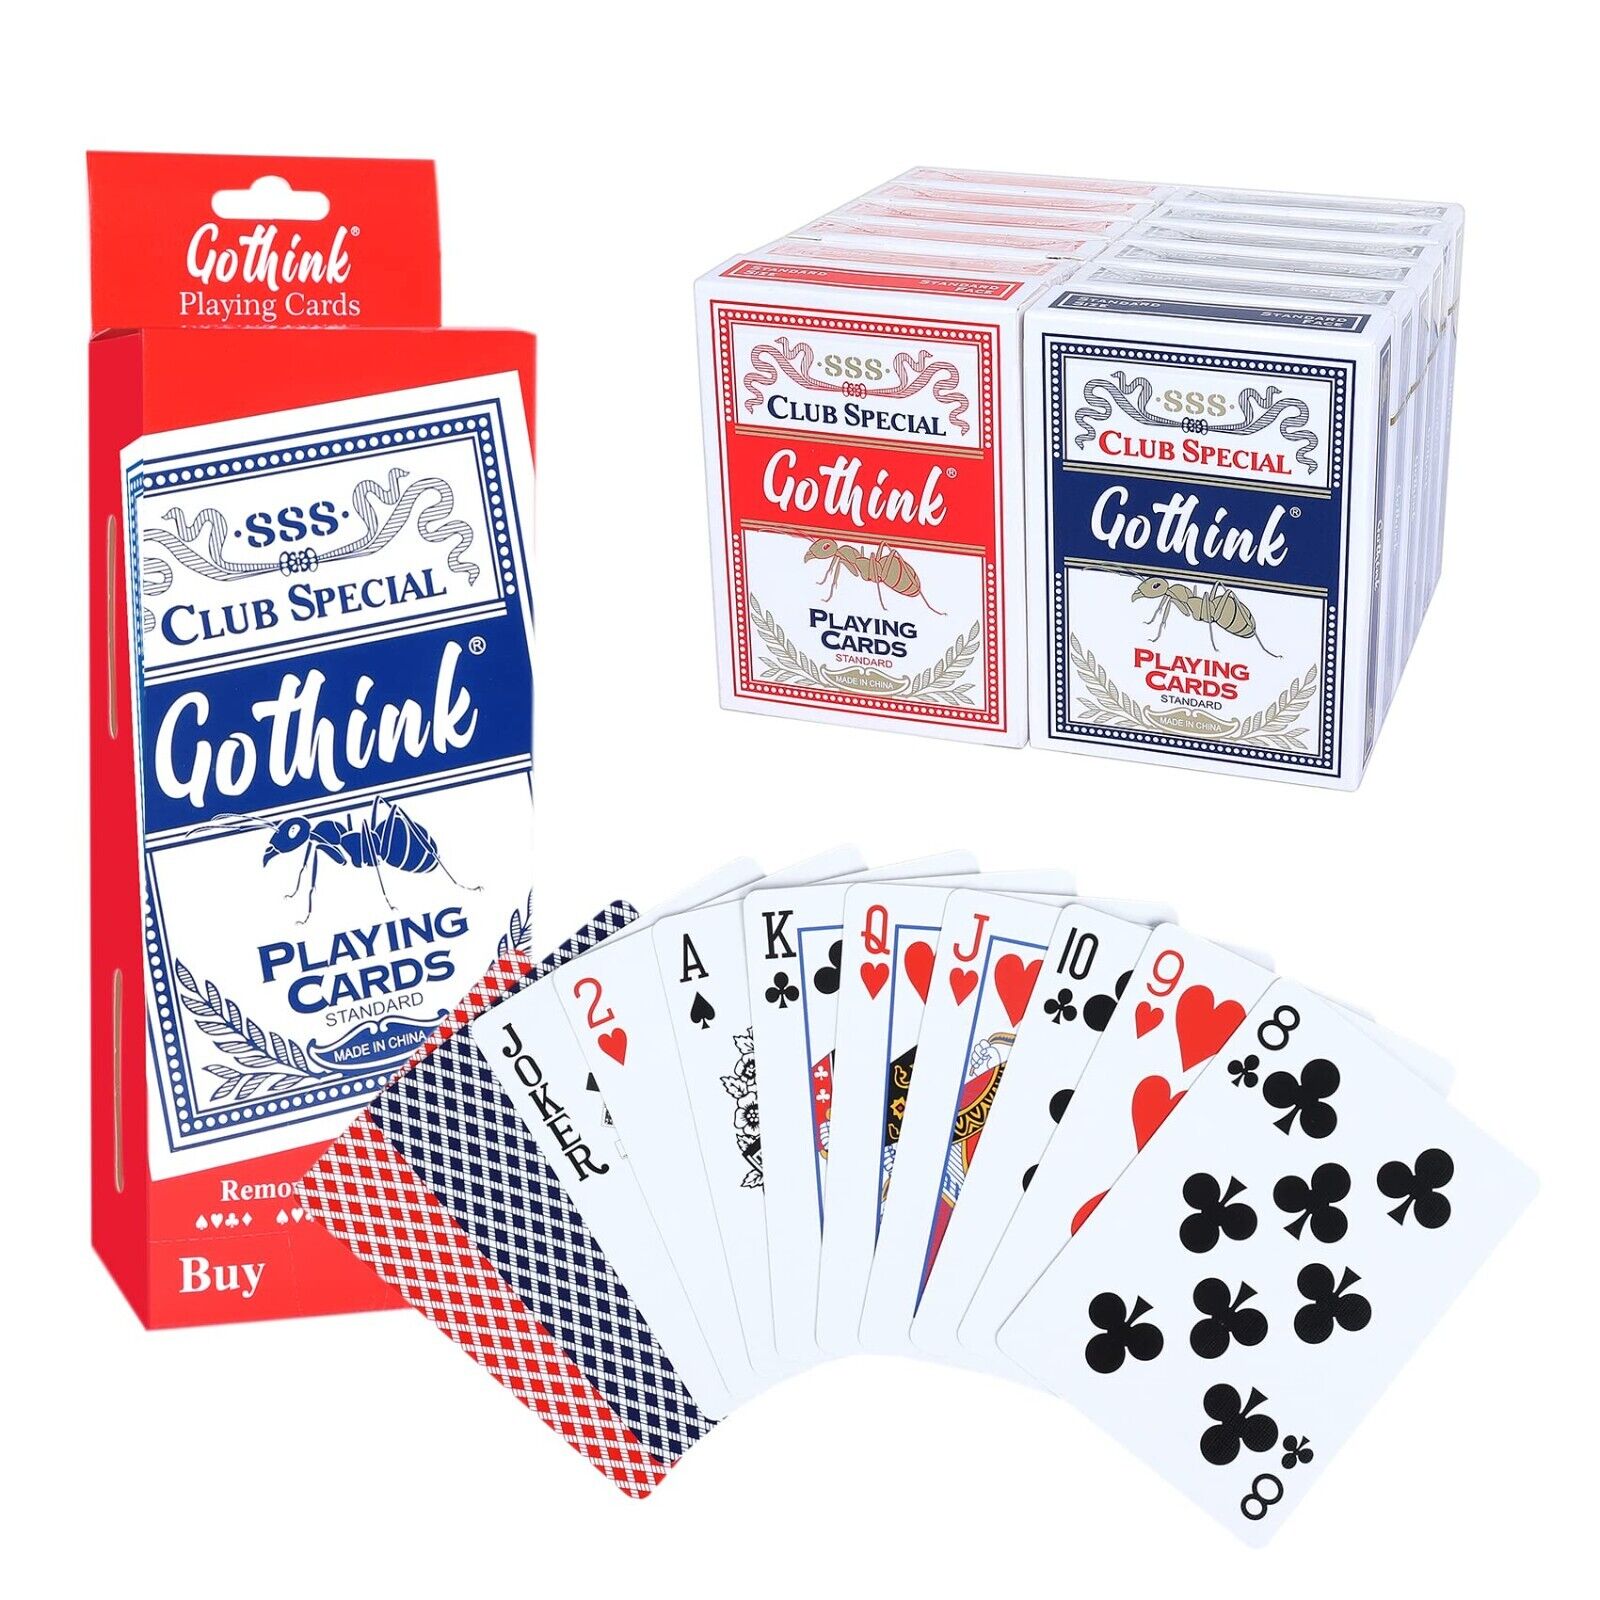 GOTHINK 12 Pack Standard Playing Cards Plastic Coating,Poker size-Free Shipping